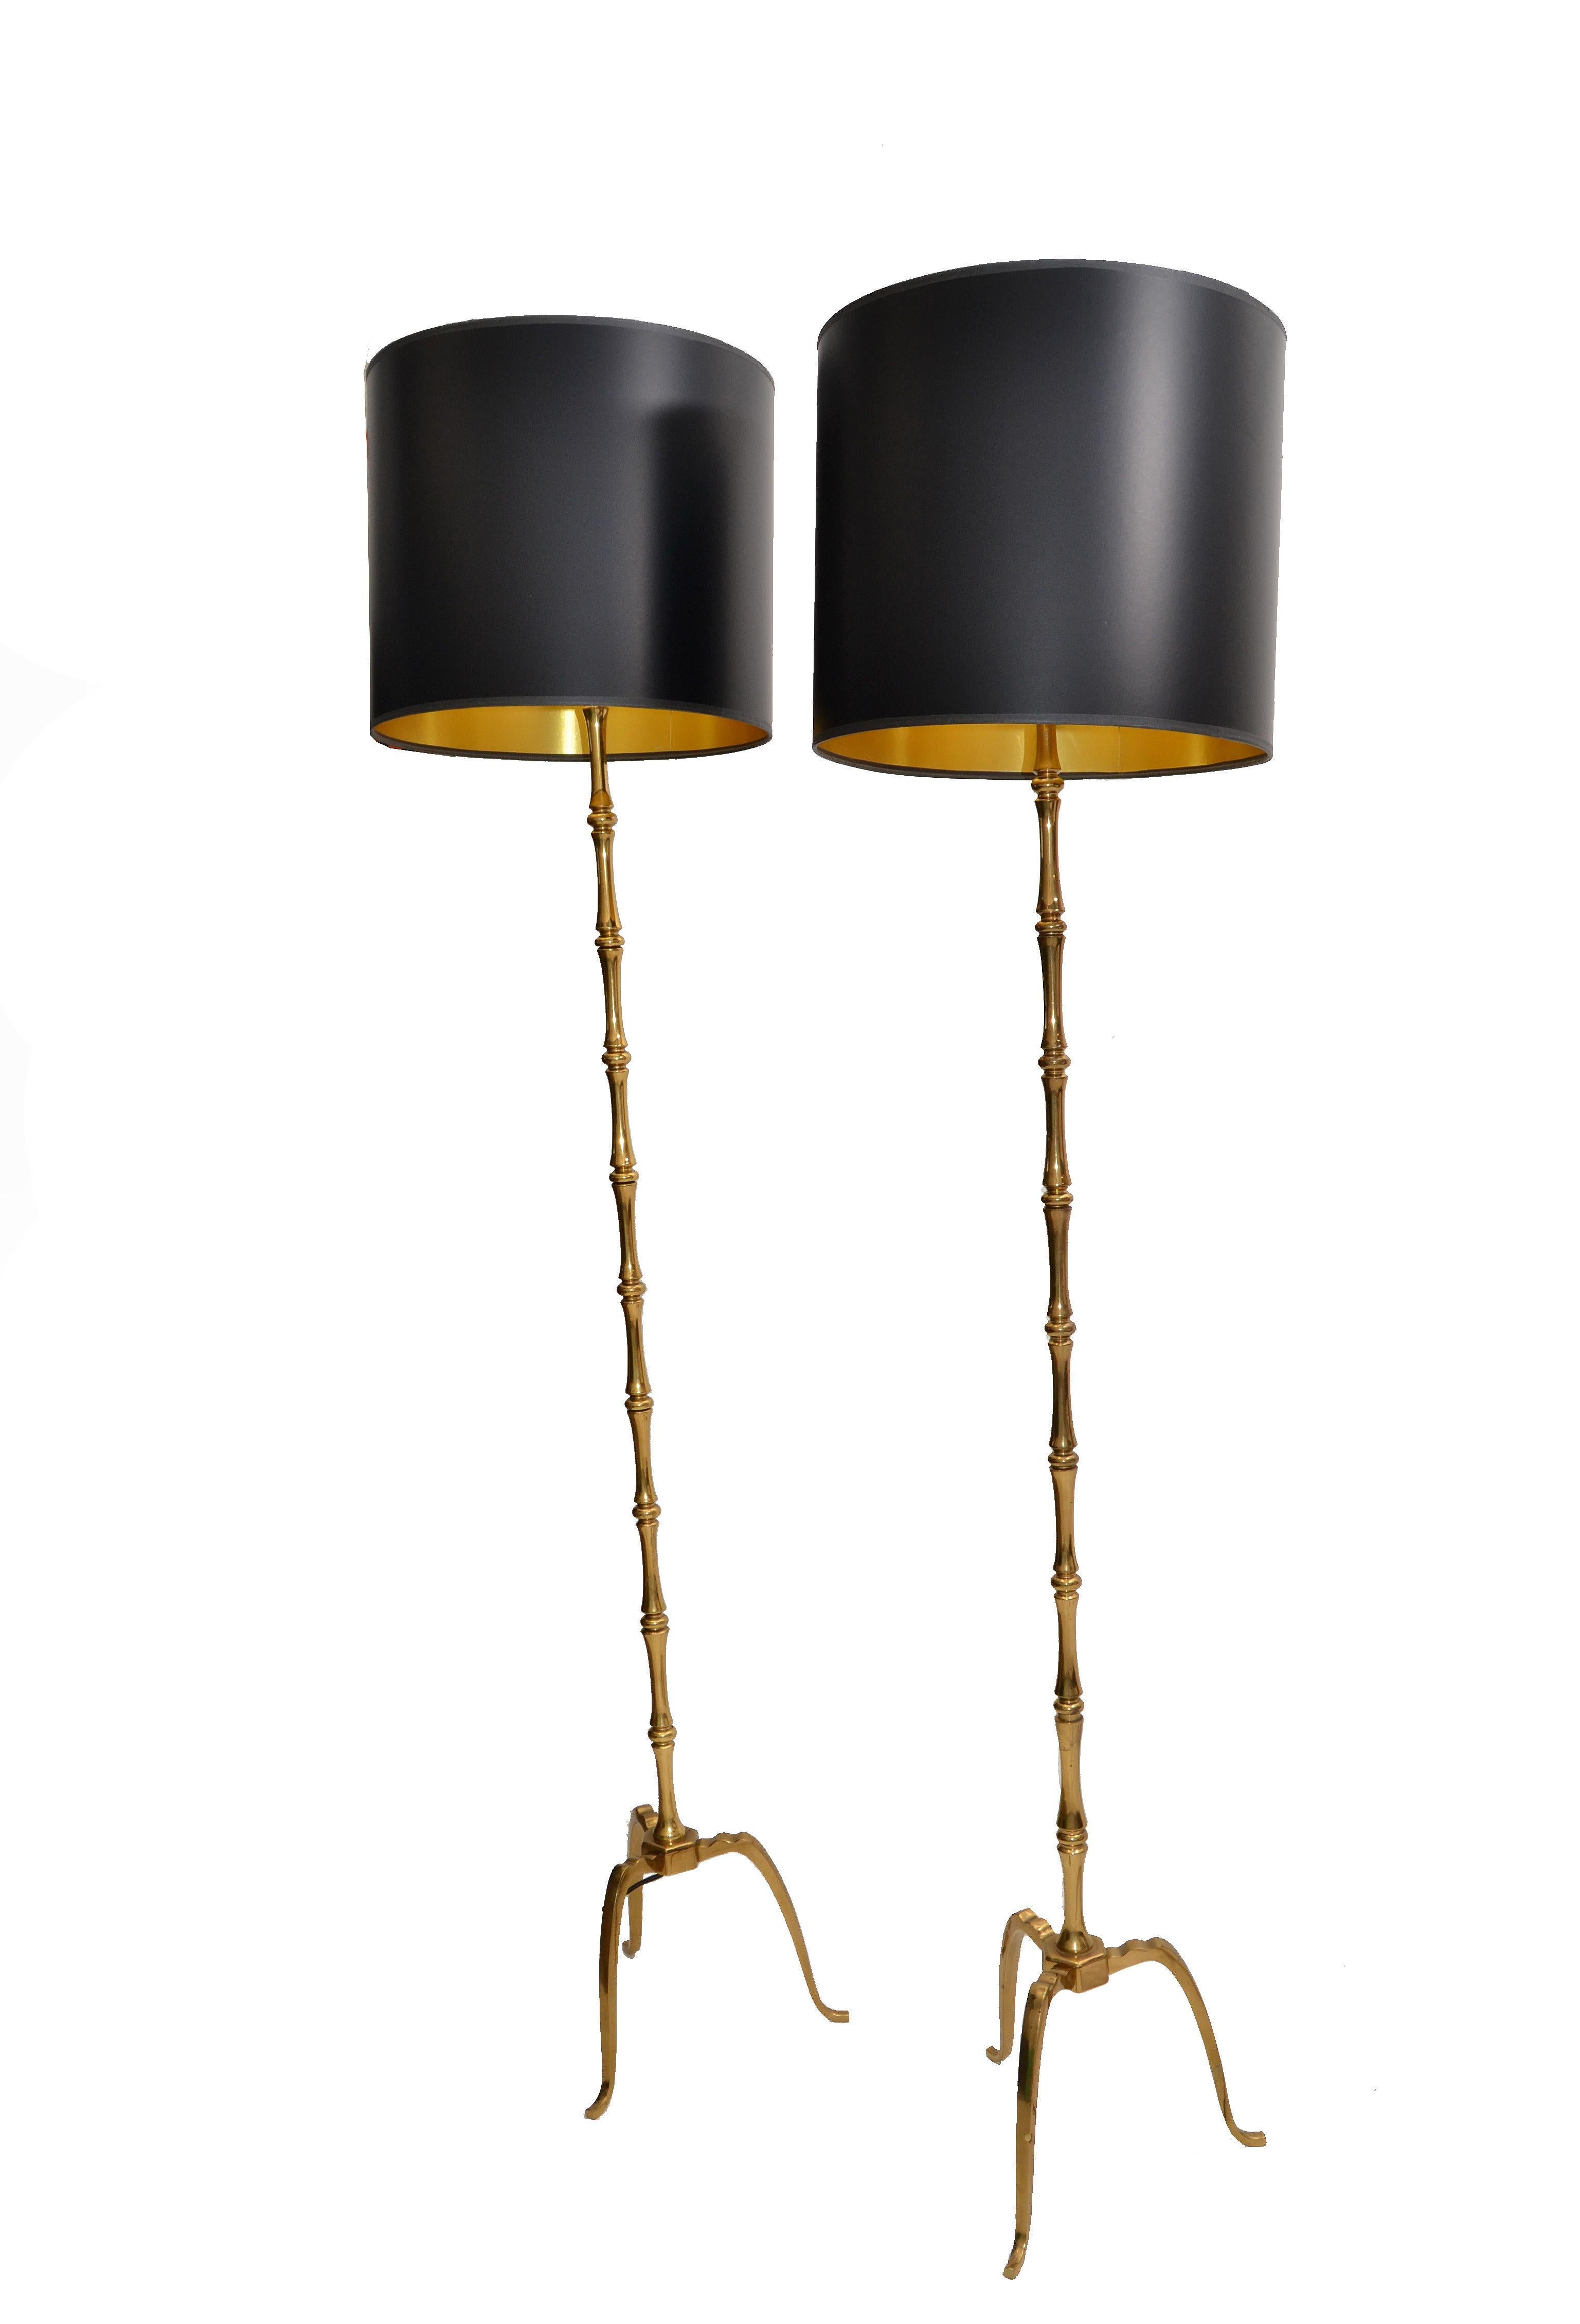 Pair solid brass French floor lamp by Maison Baguès, circa 1965 come with black & gold paper shades.
In US Rewired condition and each takes one regular or LED light bulb.
The pair is ready for a new home.